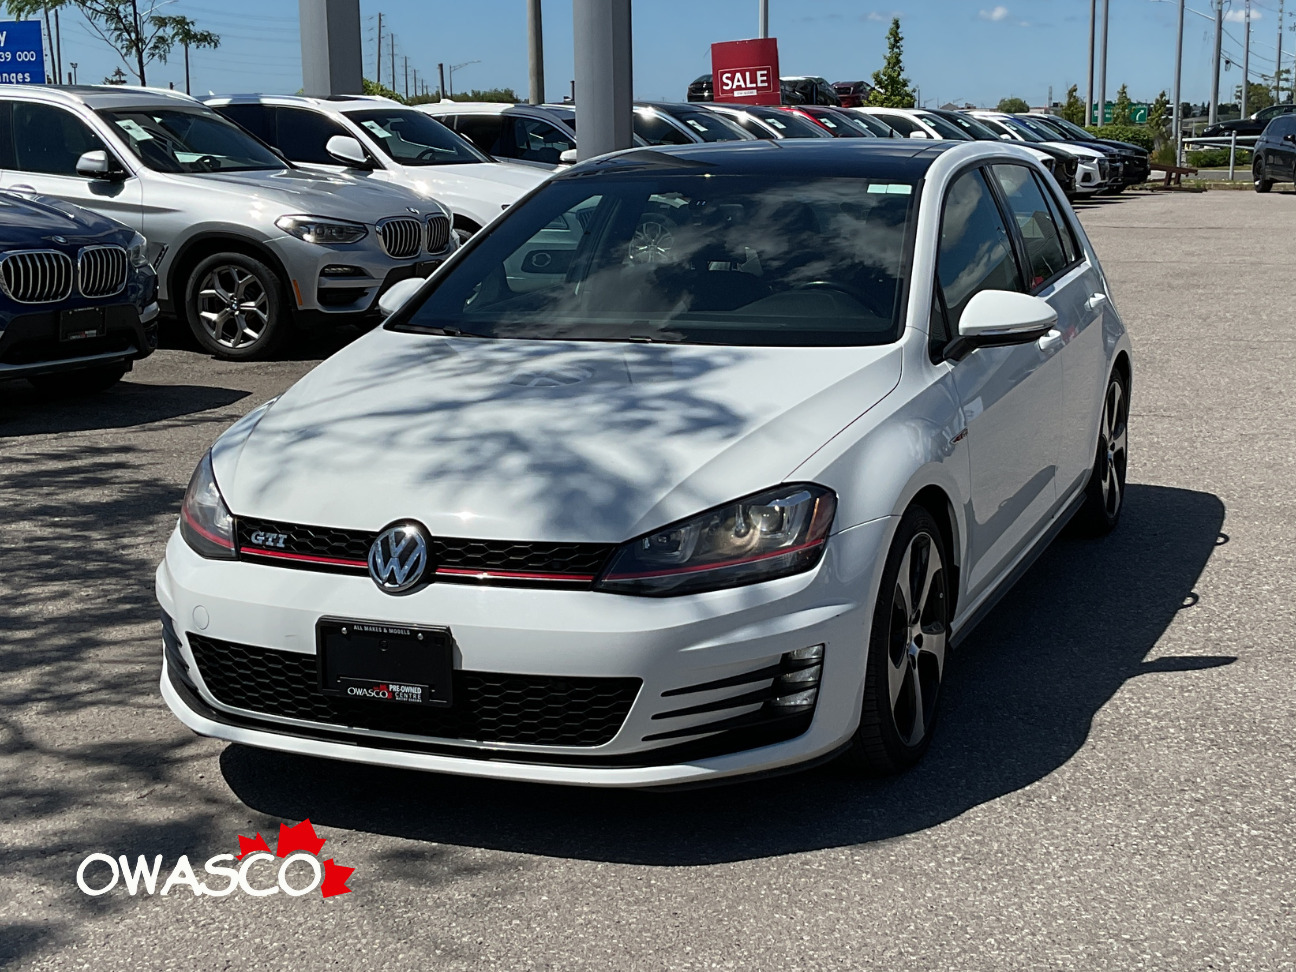 2015 Volkswagen Golf GTI 2.0L Great On Fuel! Fun To Drive! Ready For You!